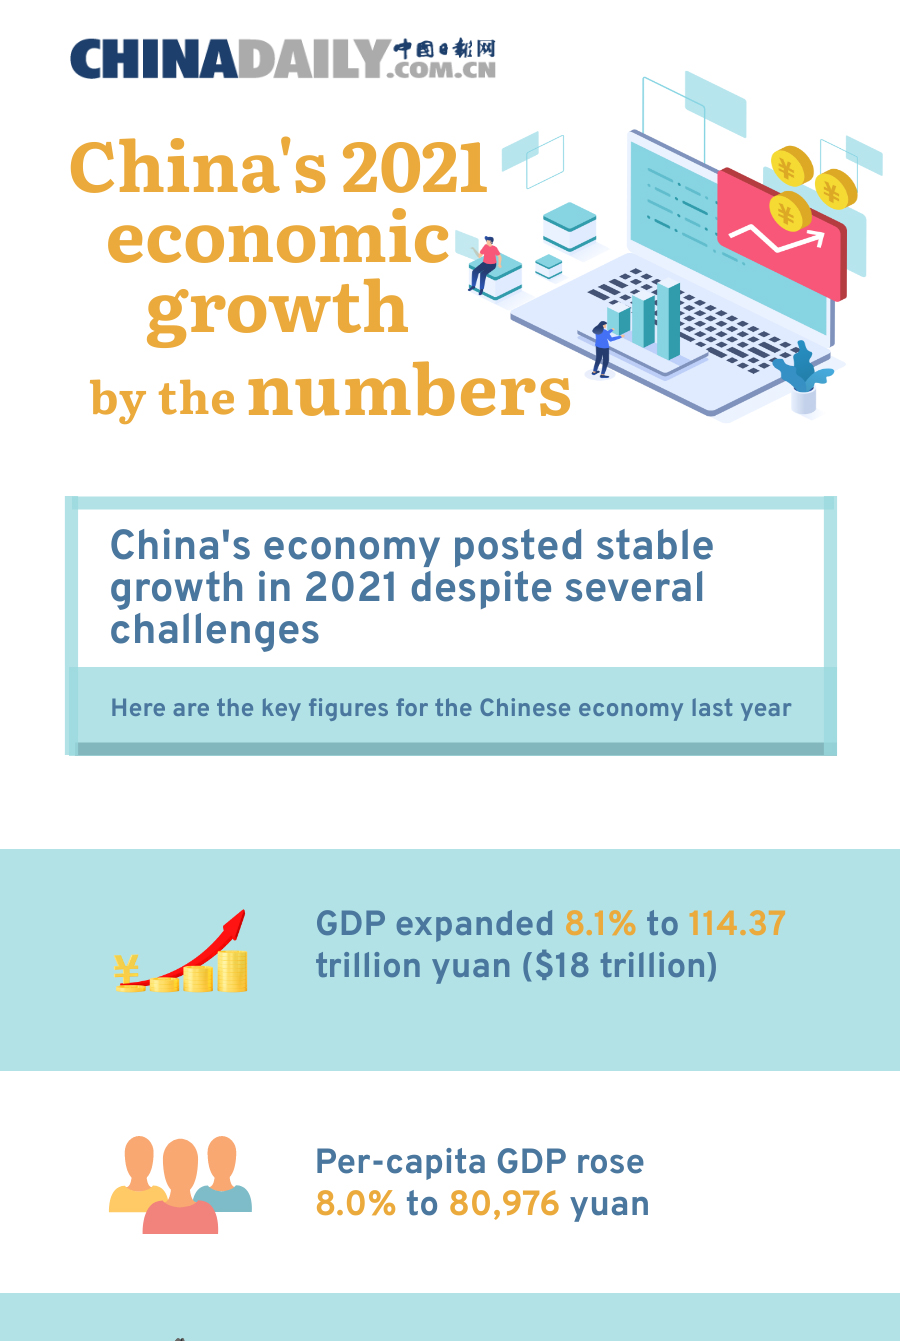 China's 2021 economic growth, by the numbers